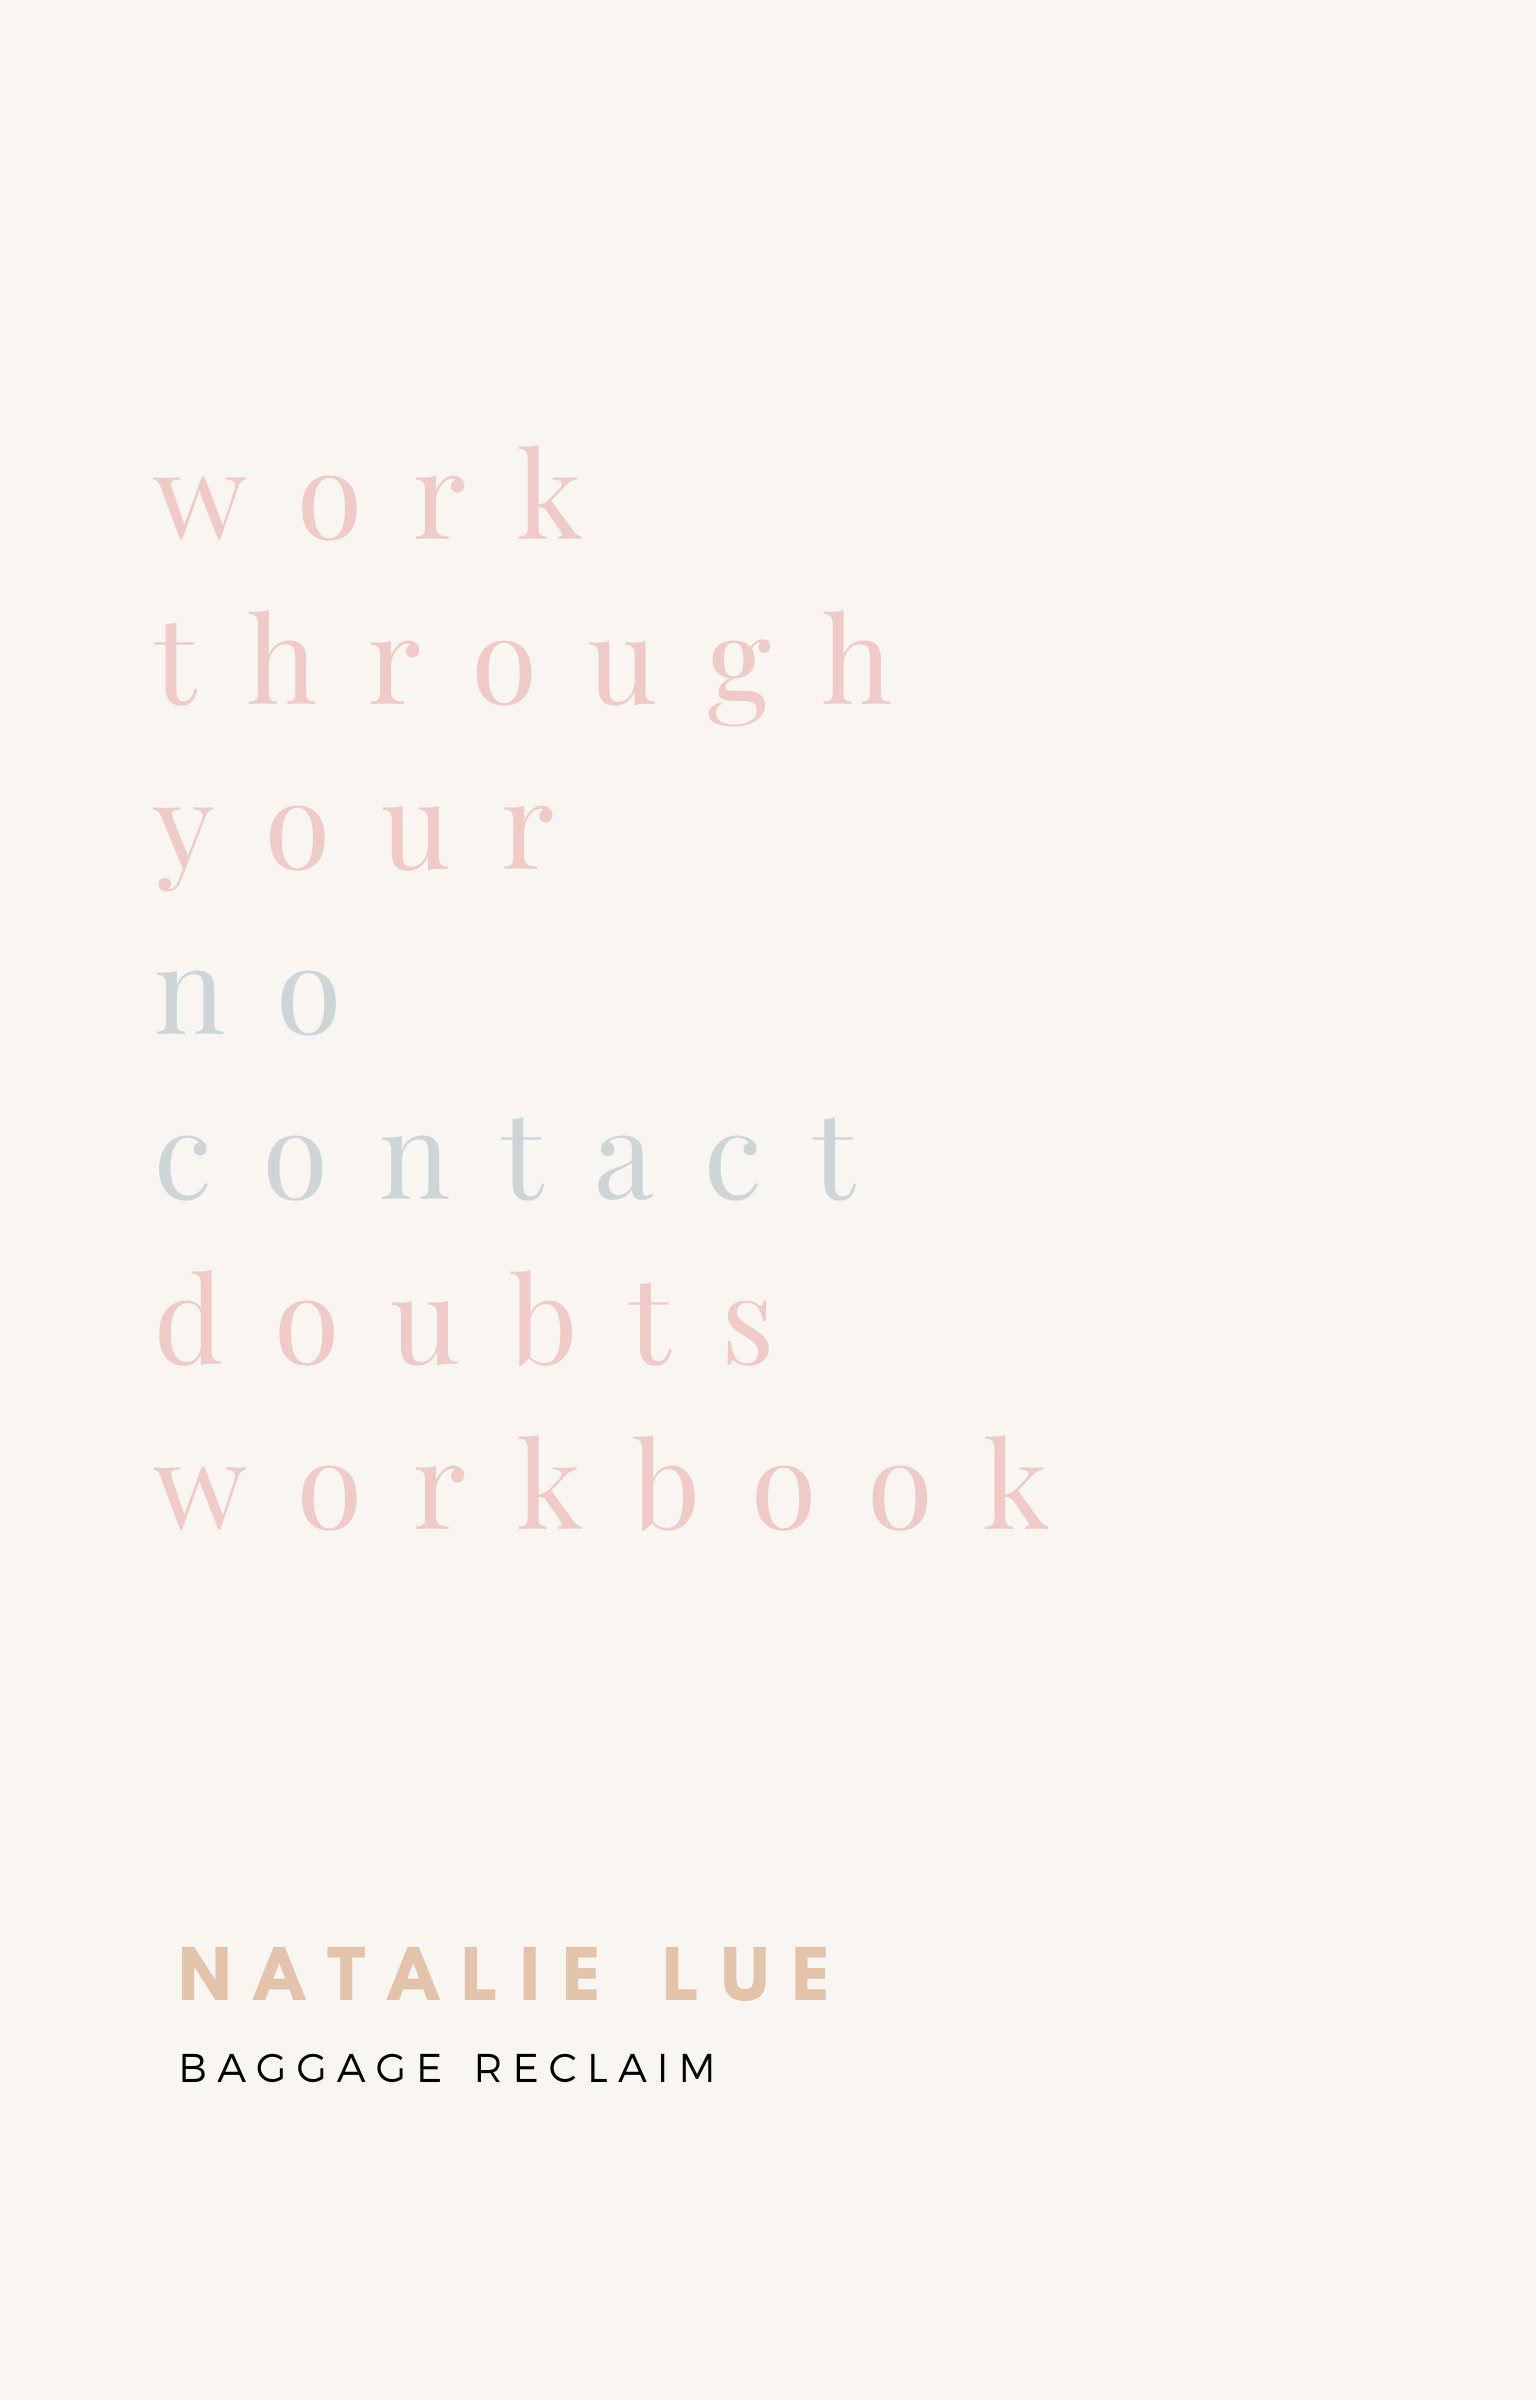 Work Through Your No Contact Doubts Workbook by Natalie Lue